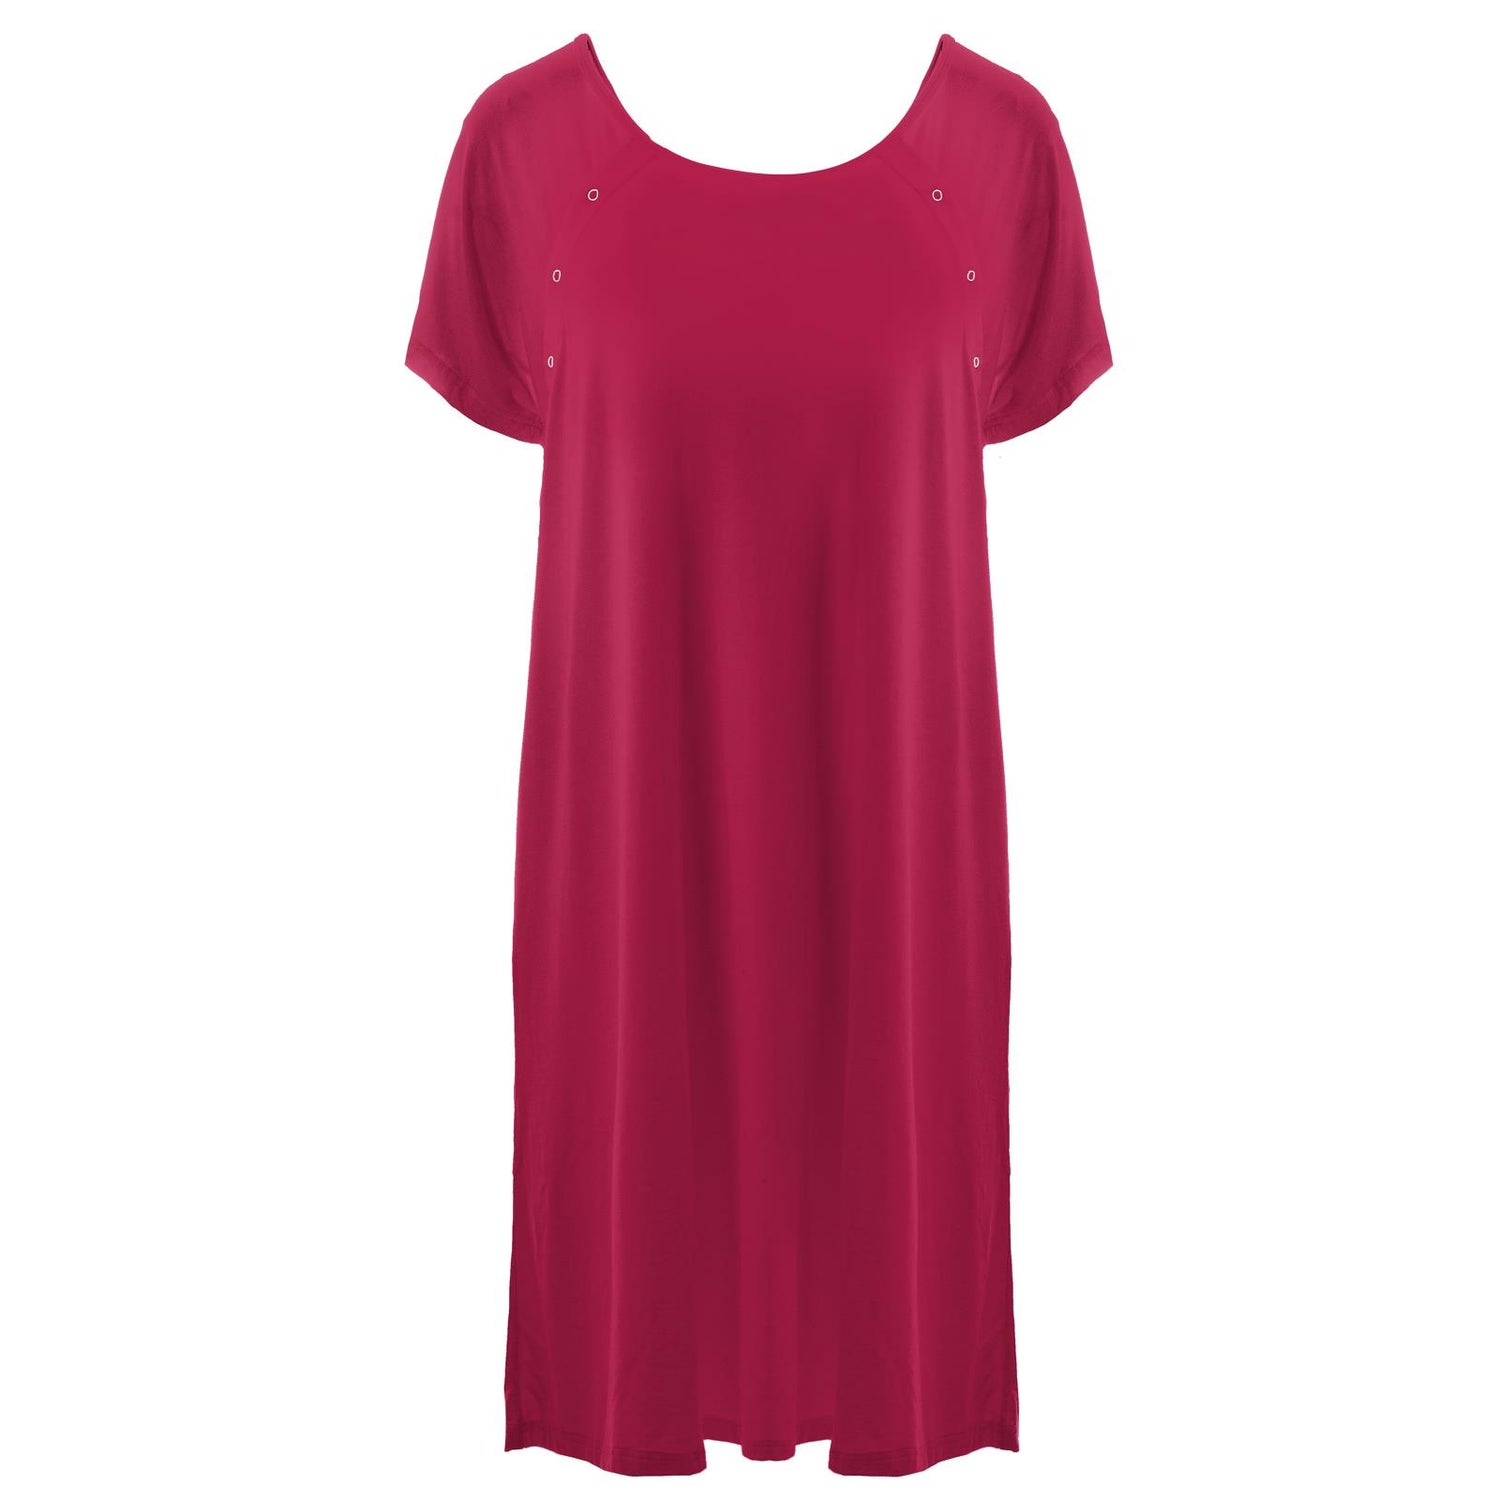 Women's Hospital Gown in Rhododendron